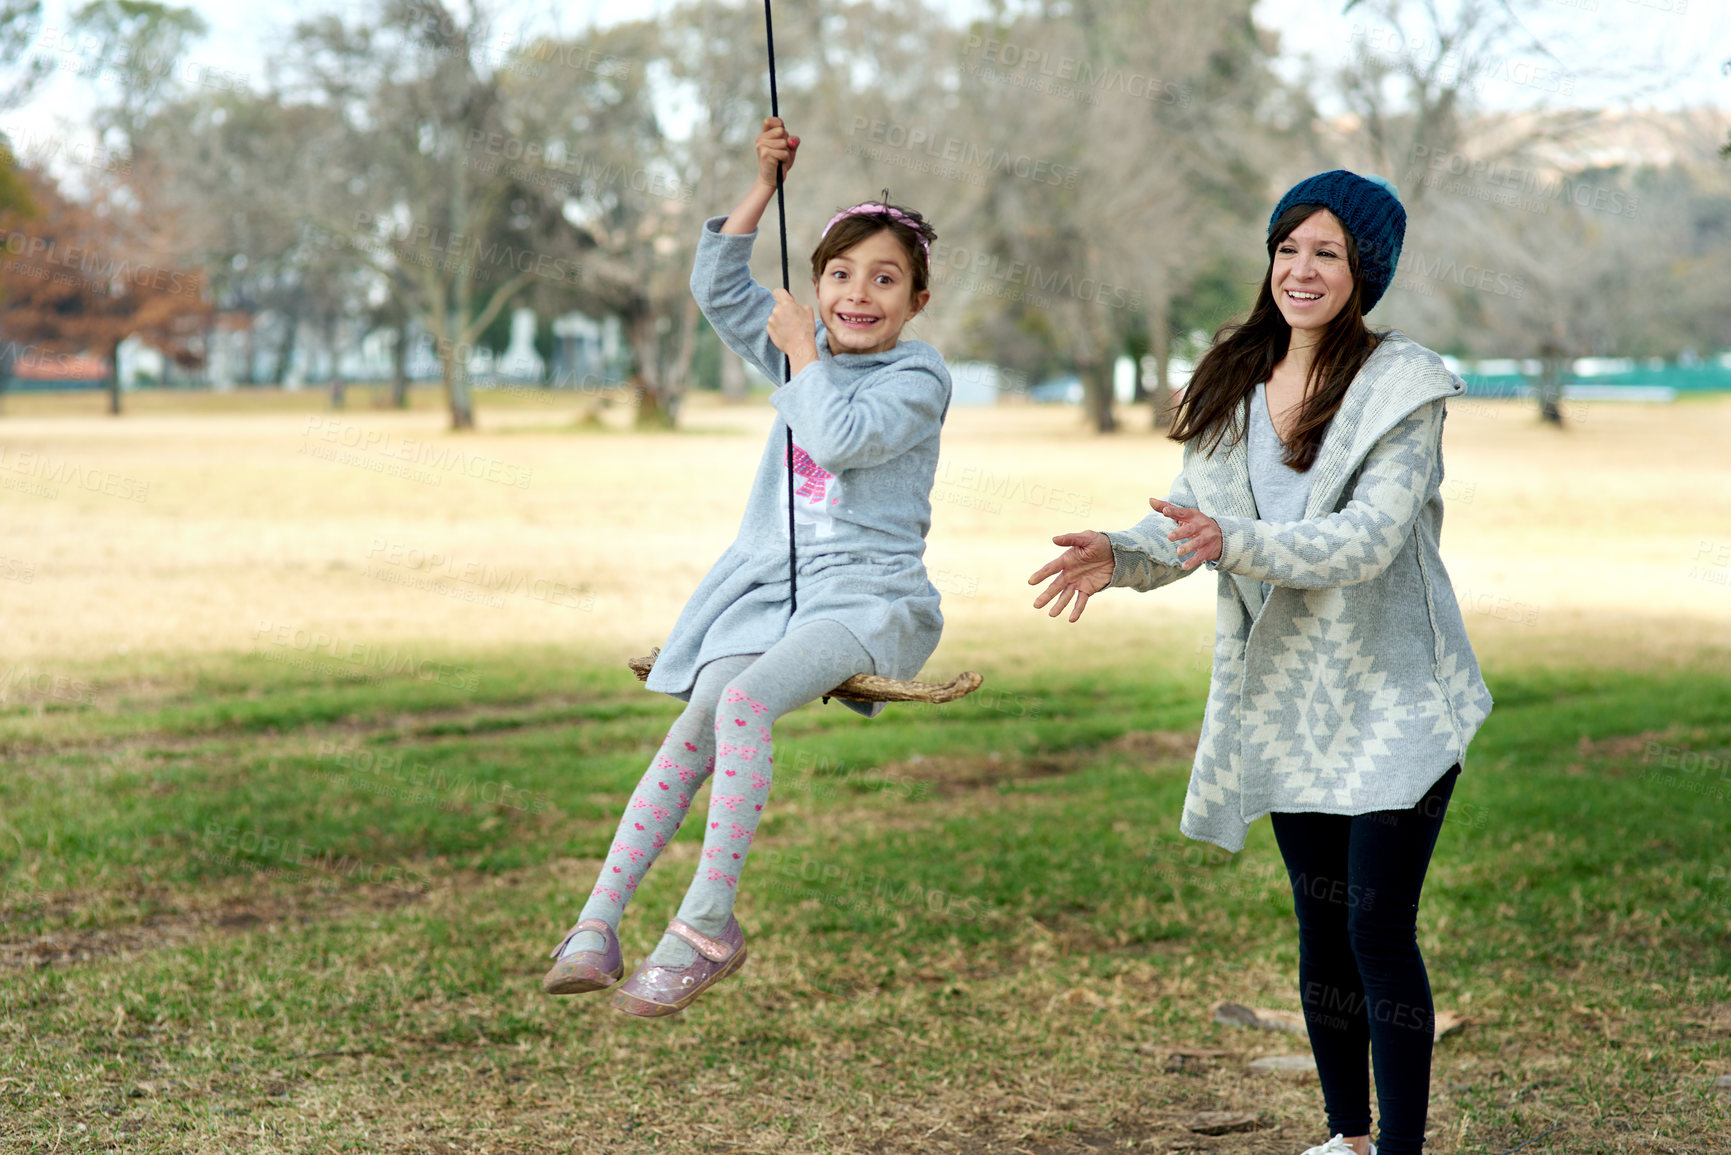 Buy stock photo Shot of a mother pushing her daughter on a swing at the park